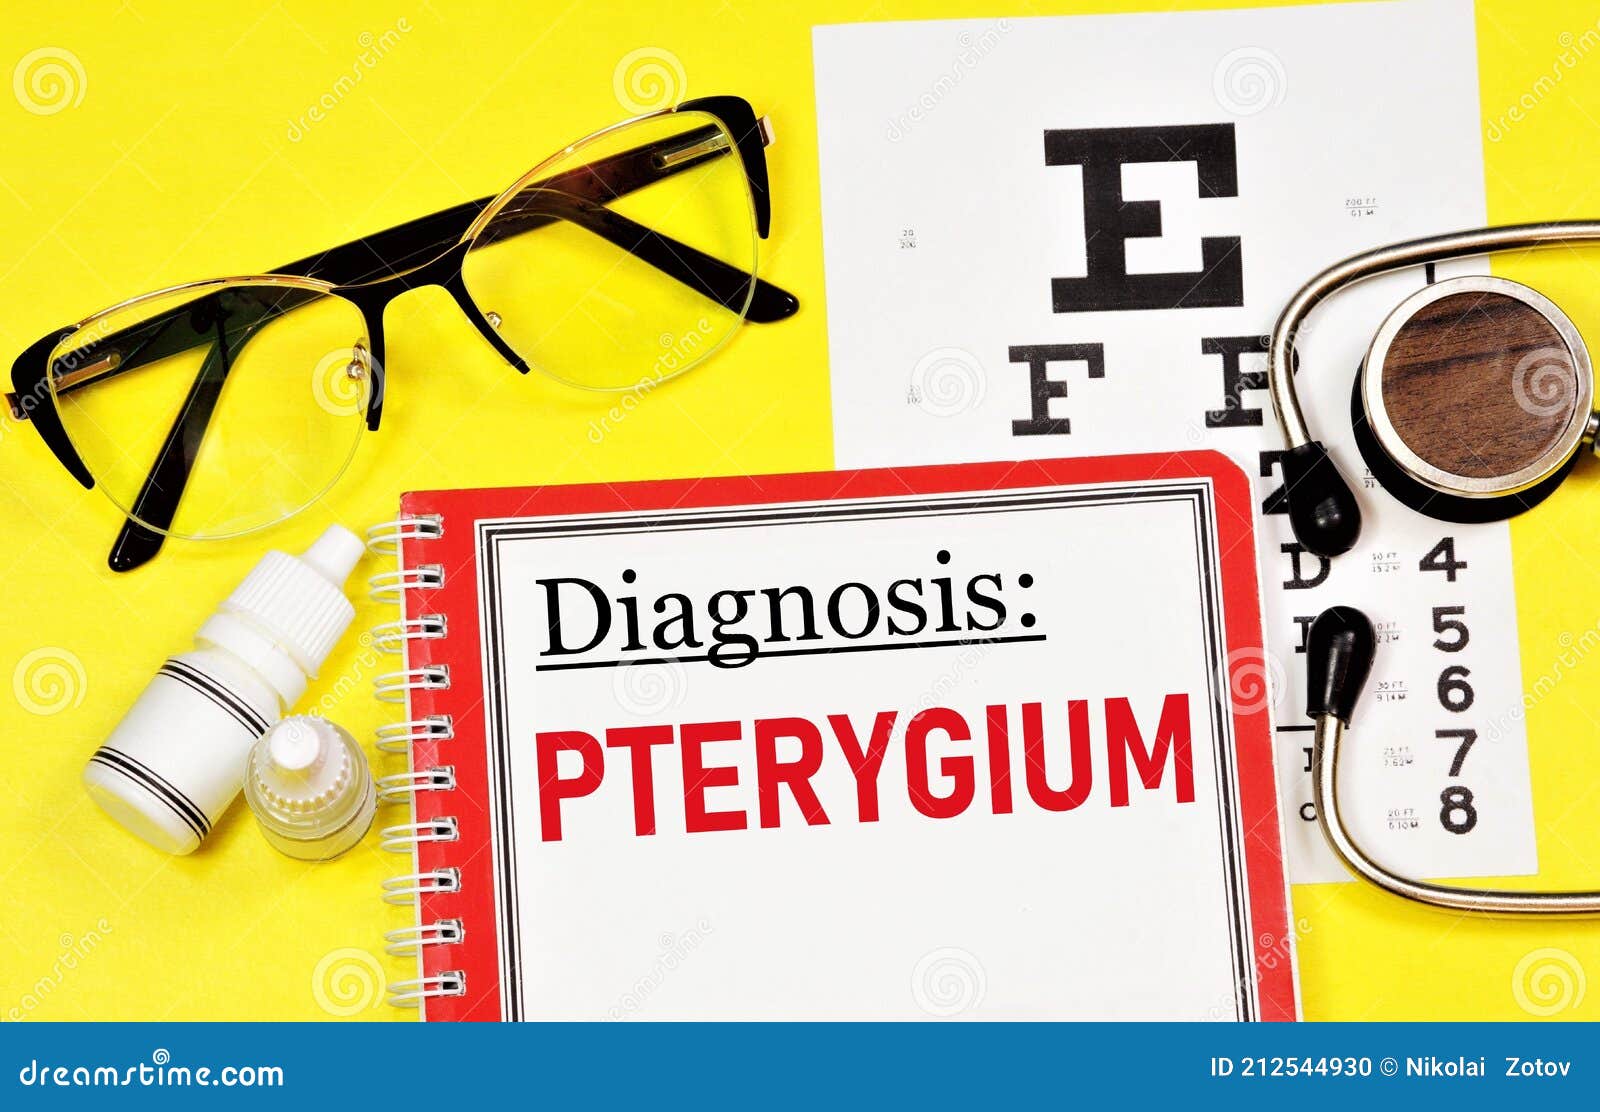 pterygium. a text label to indicate a health condition.